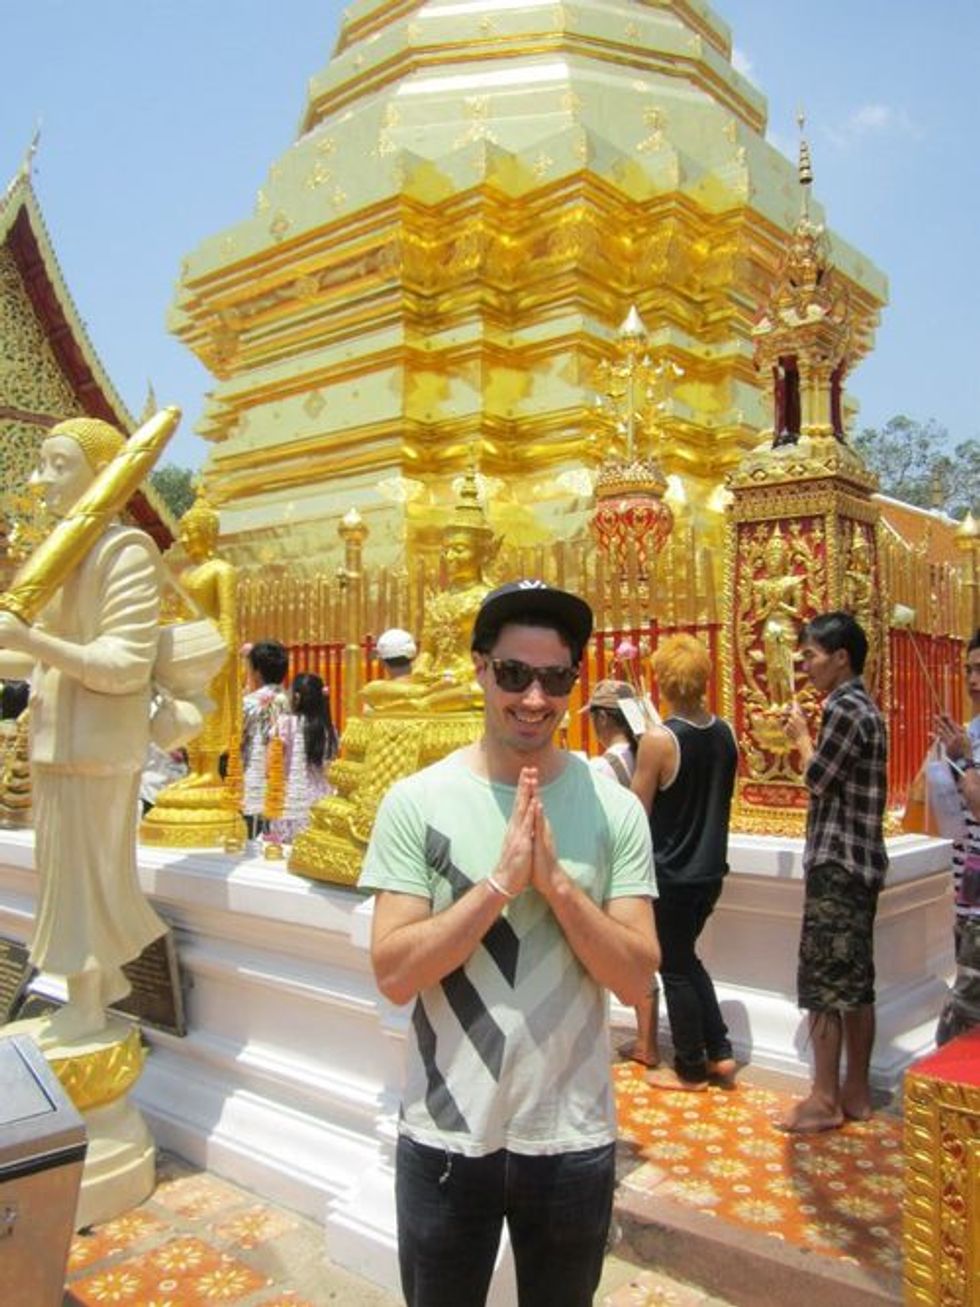 Gay Thailand - Chiang Mai temple - Benjamin Solomon Out Globetrotter